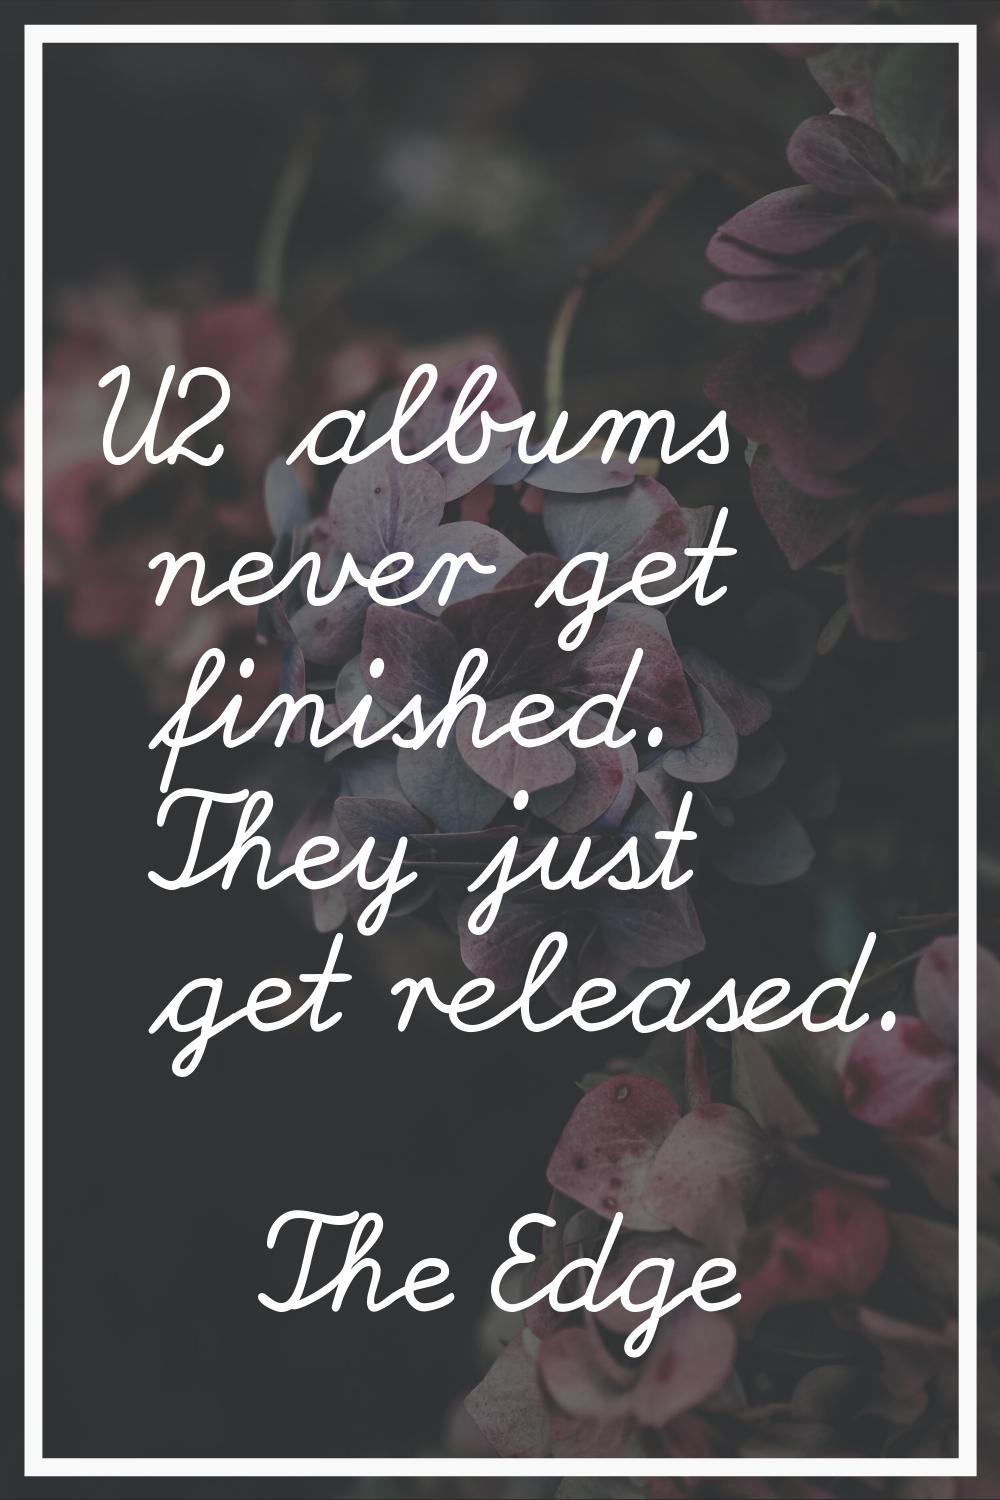 U2 albums never get finished. They just get released.